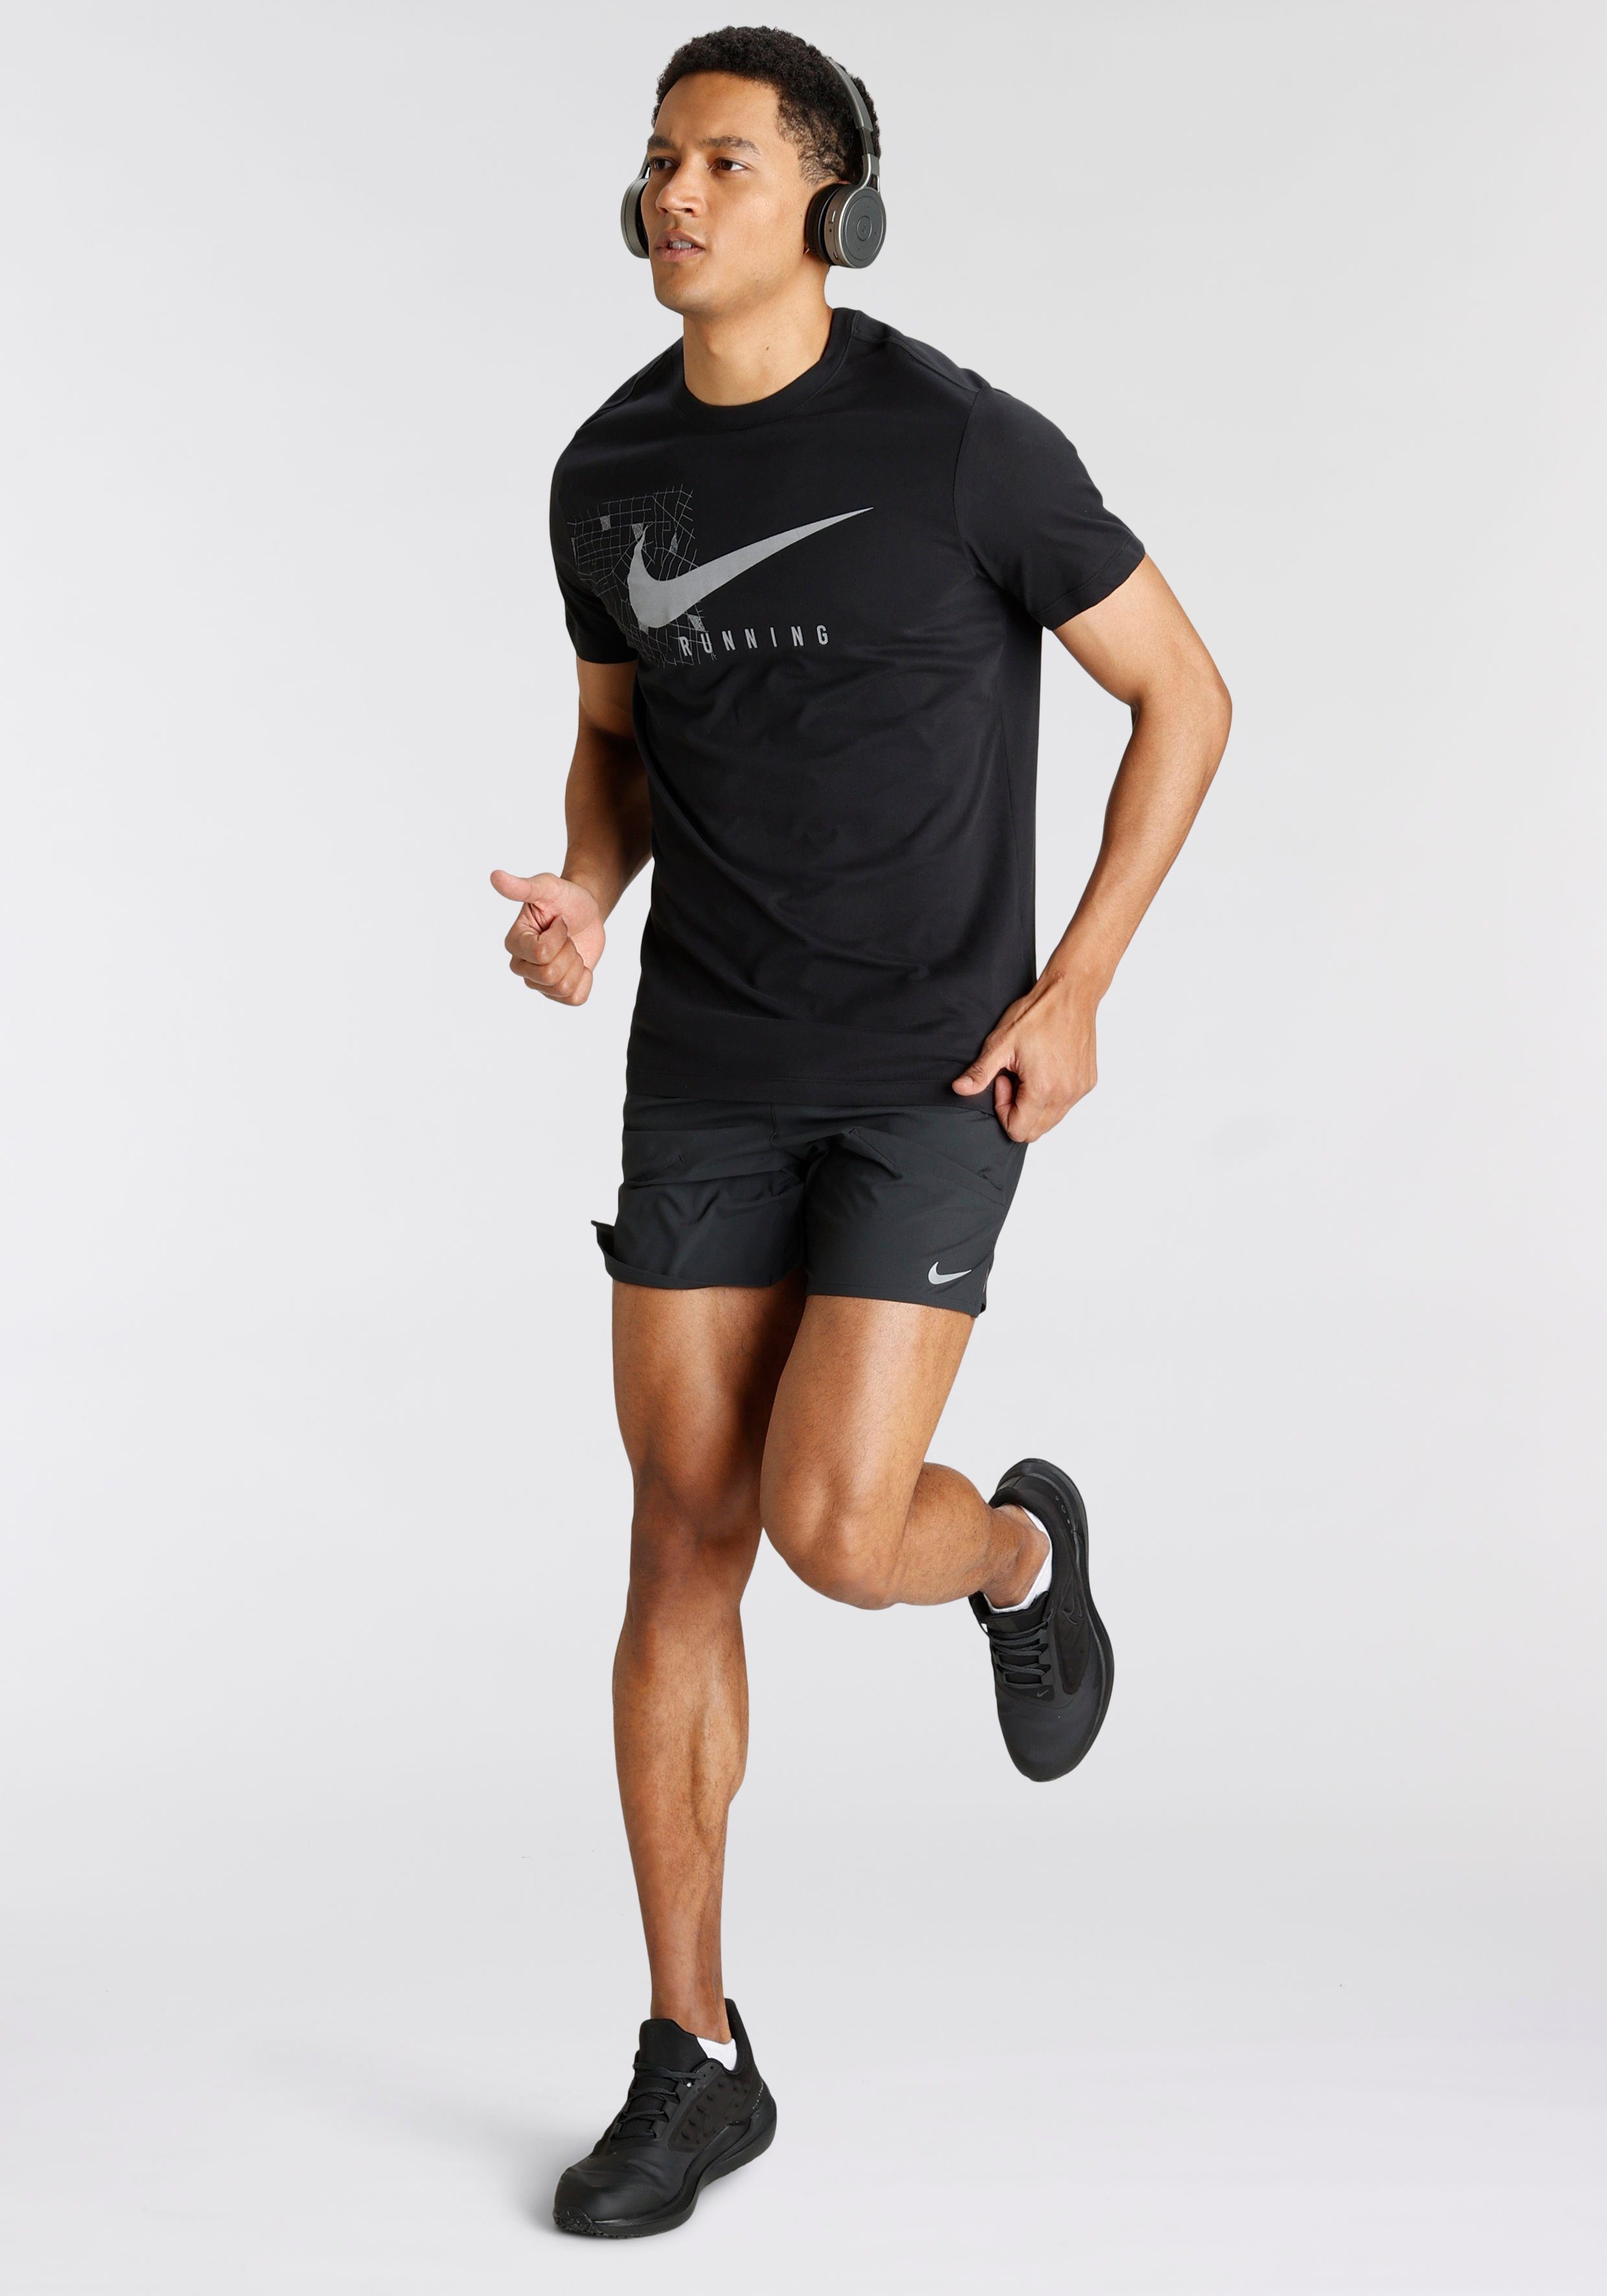 Running Brief-Lined Nike " Shorts Dri-FIT Stride Laufshorts Men's